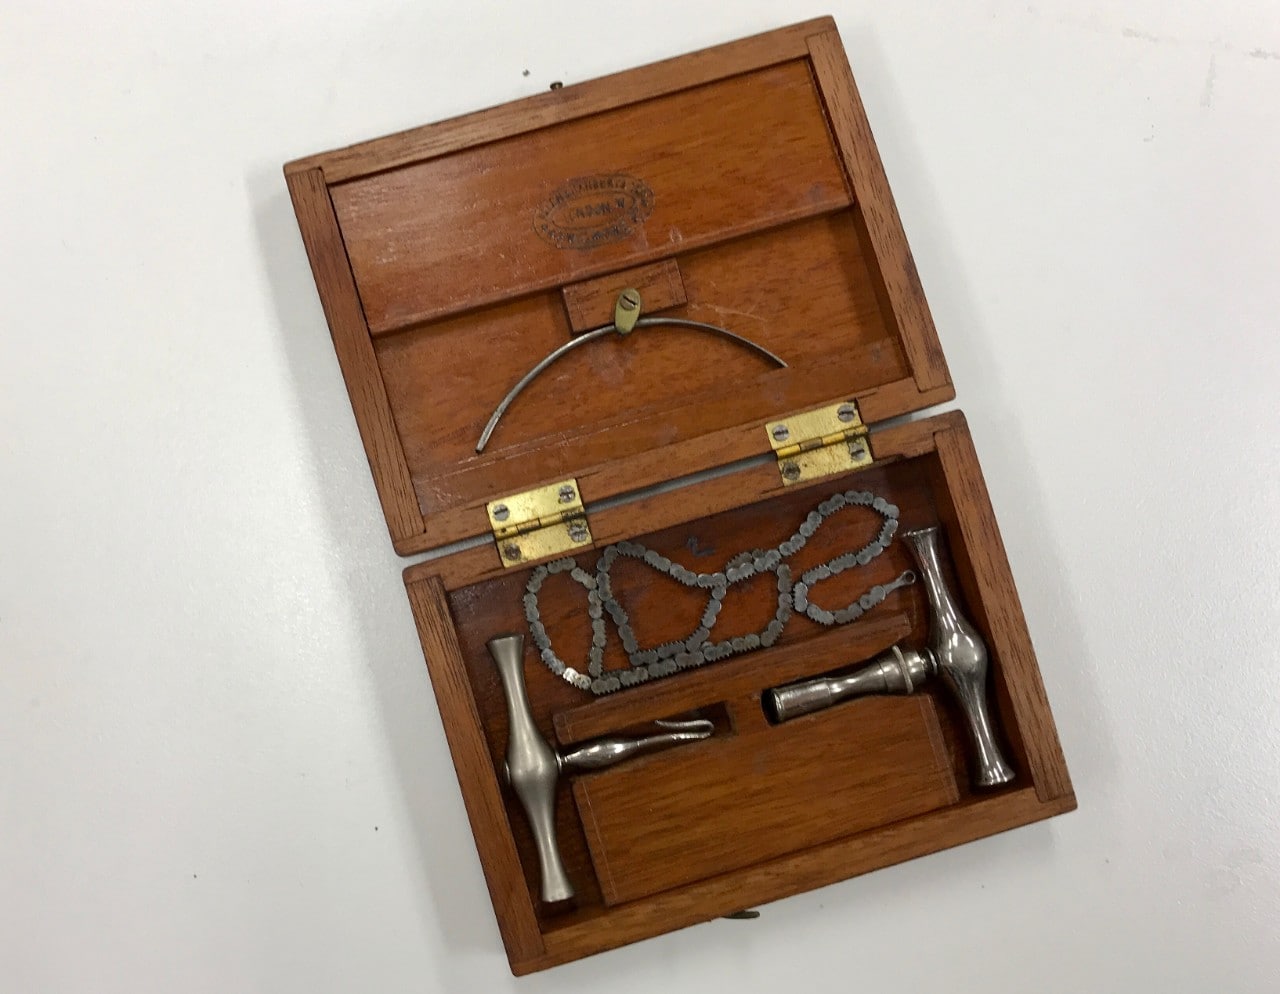 The saw from the Sydney Medical School Heritage Collection